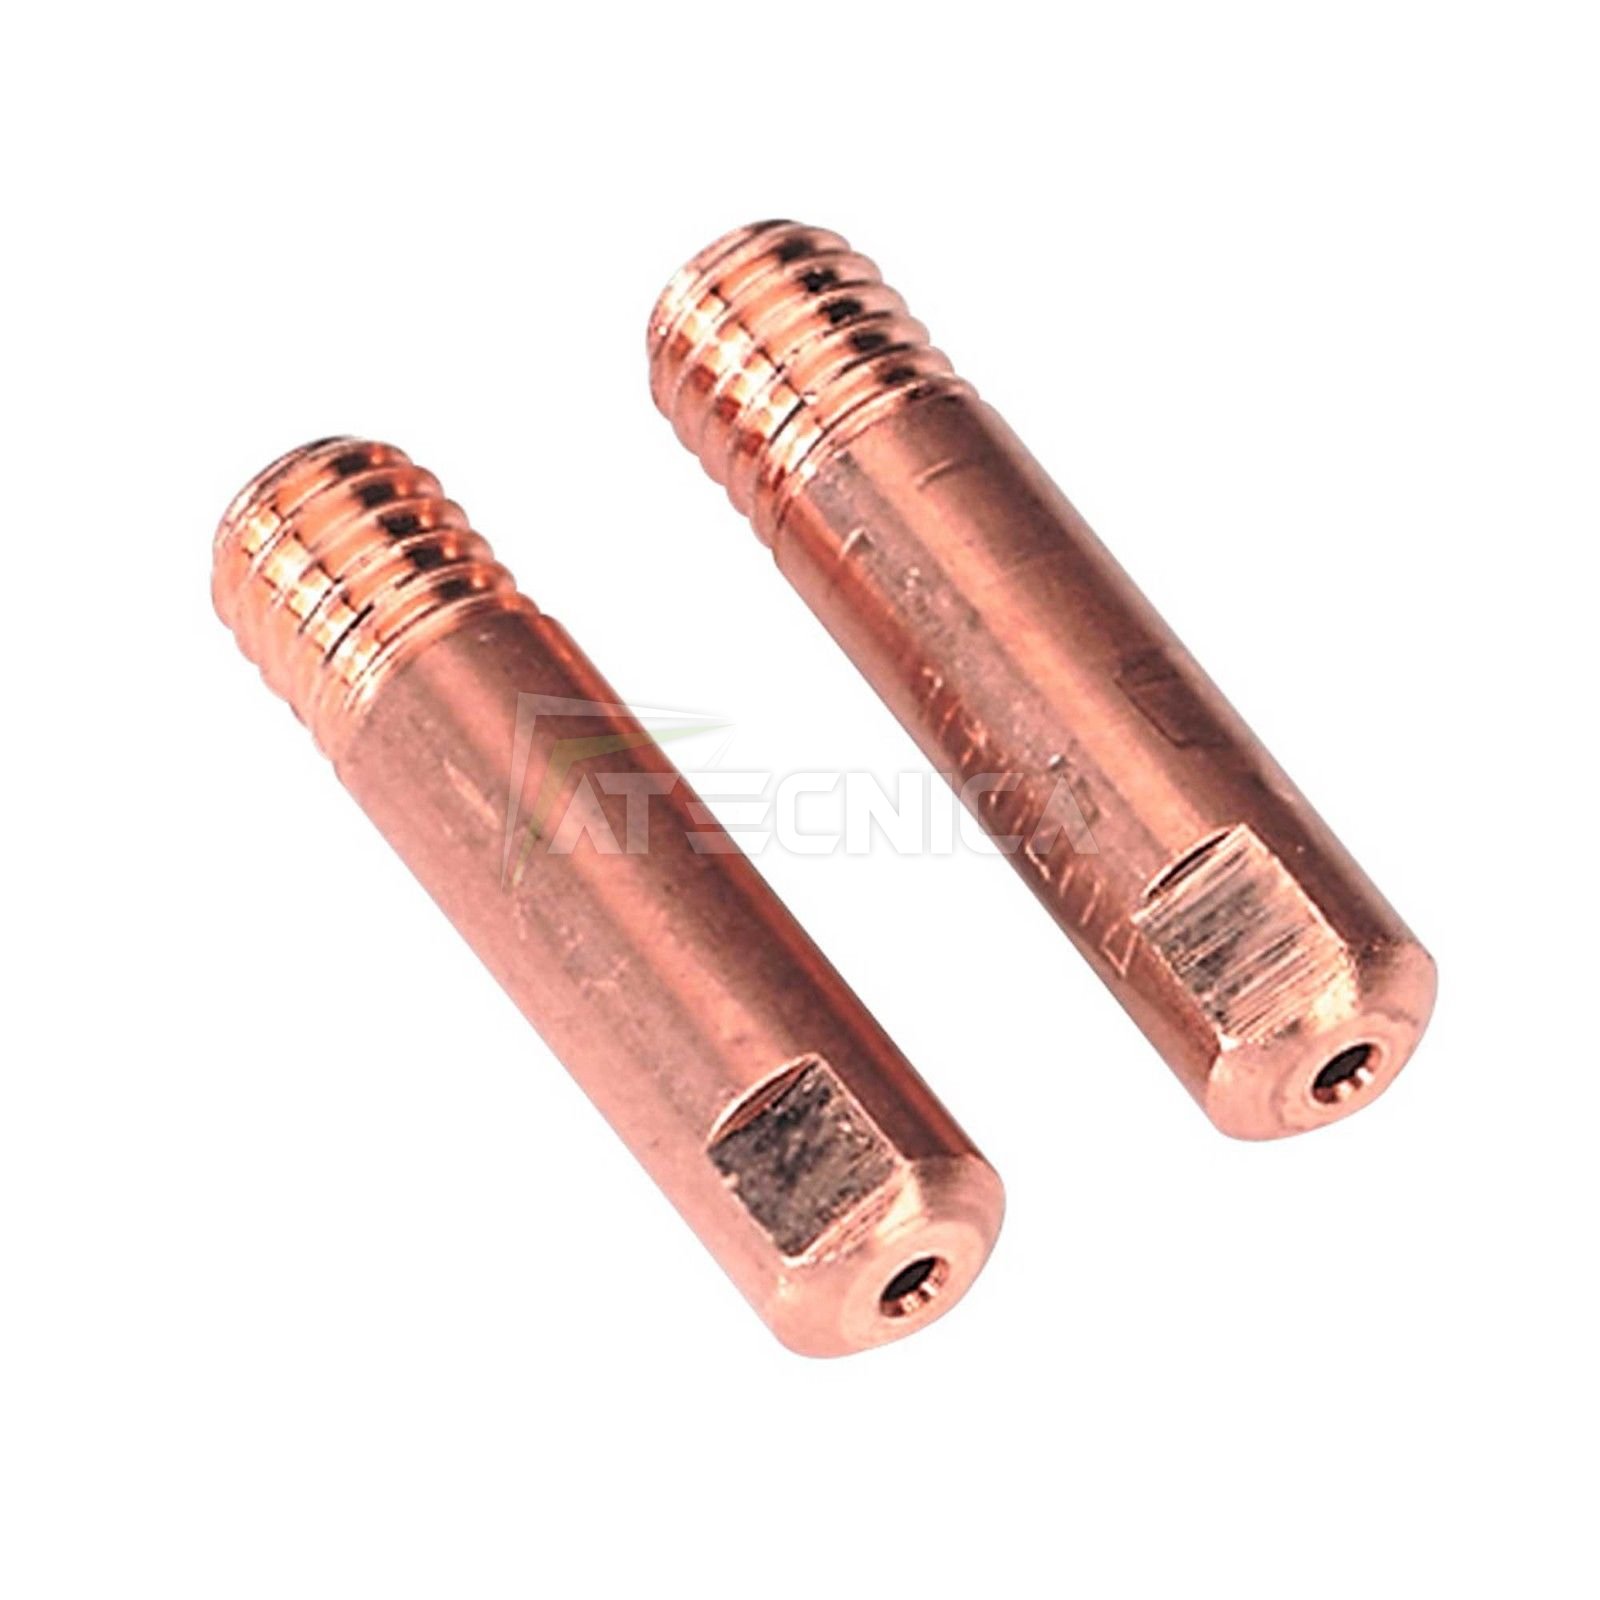 2 buses tube contact MB15 tip pointe guide fil 0.6 mm branchement M6  soudage MIG MAG